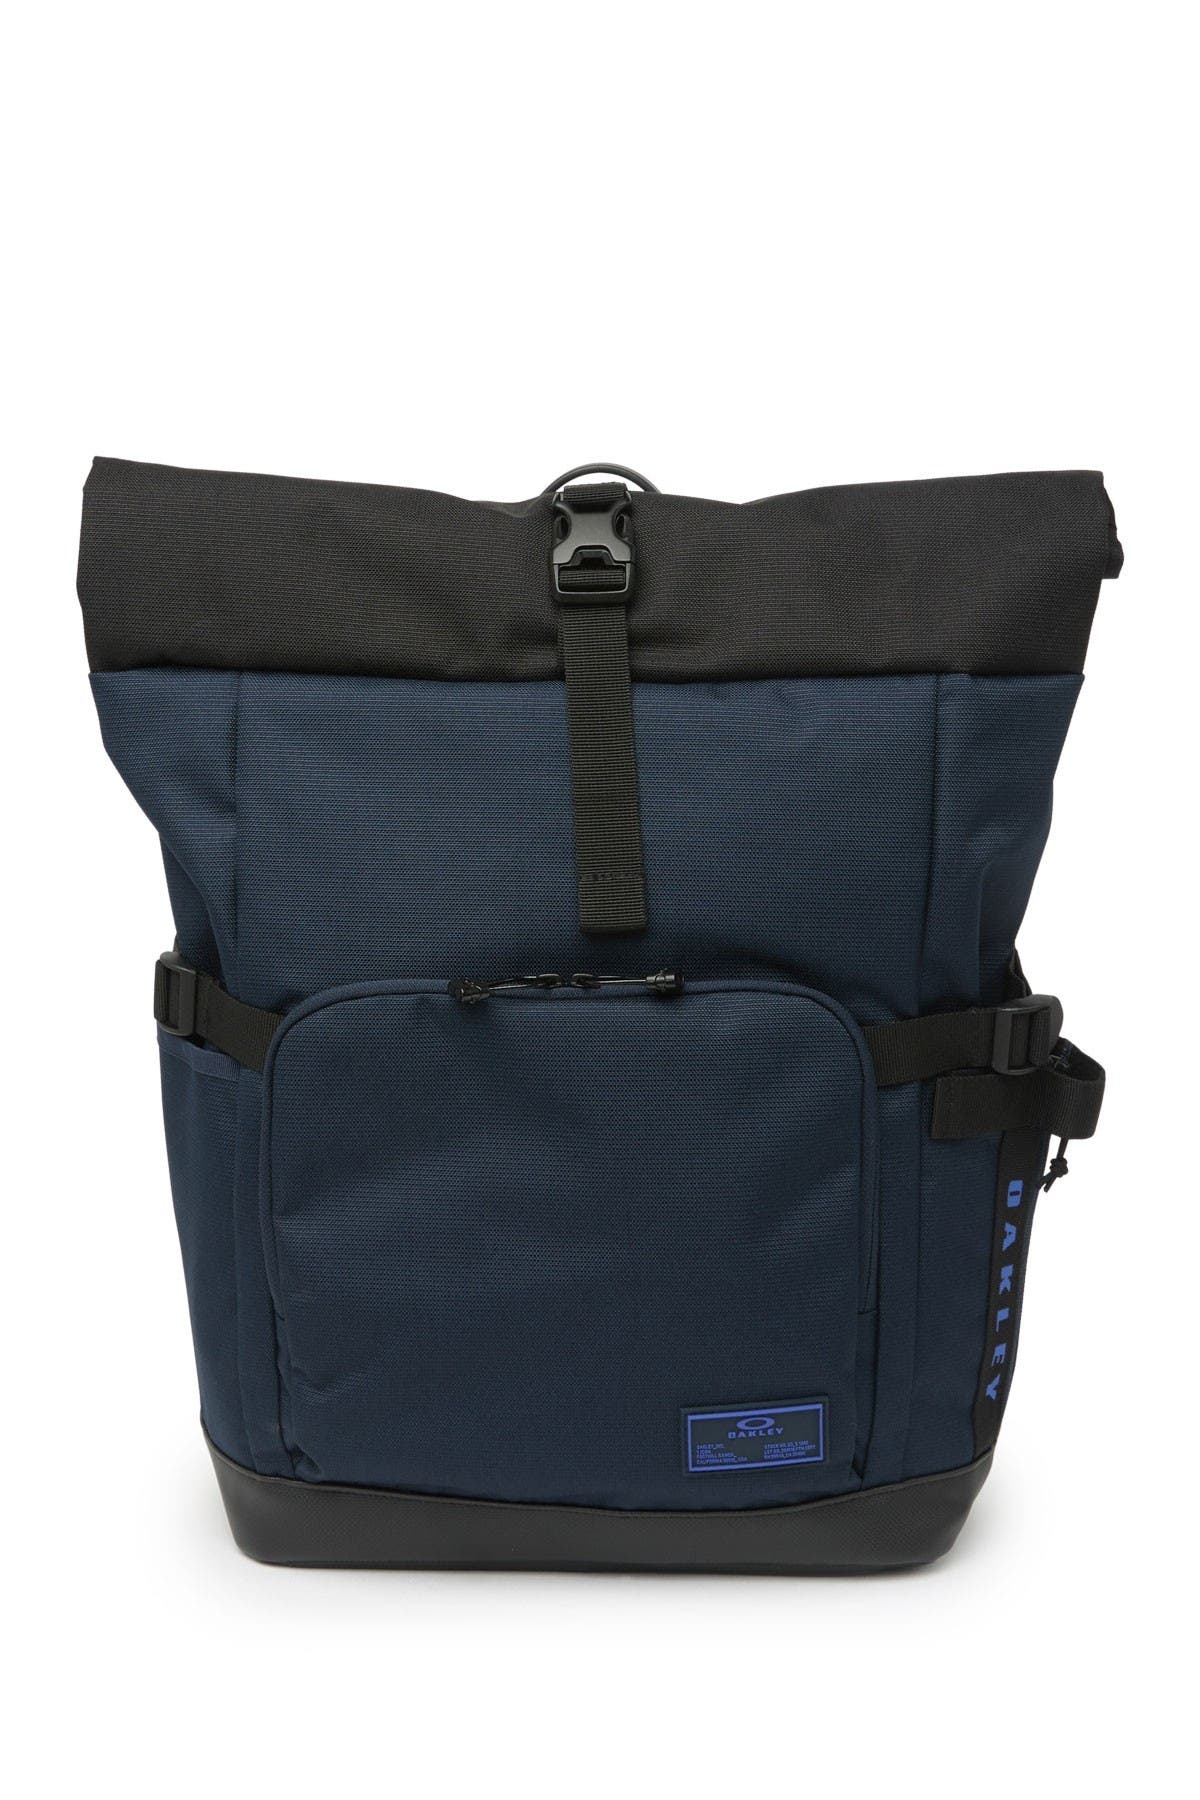 Oakley Rolled Up Backpack In Fathom